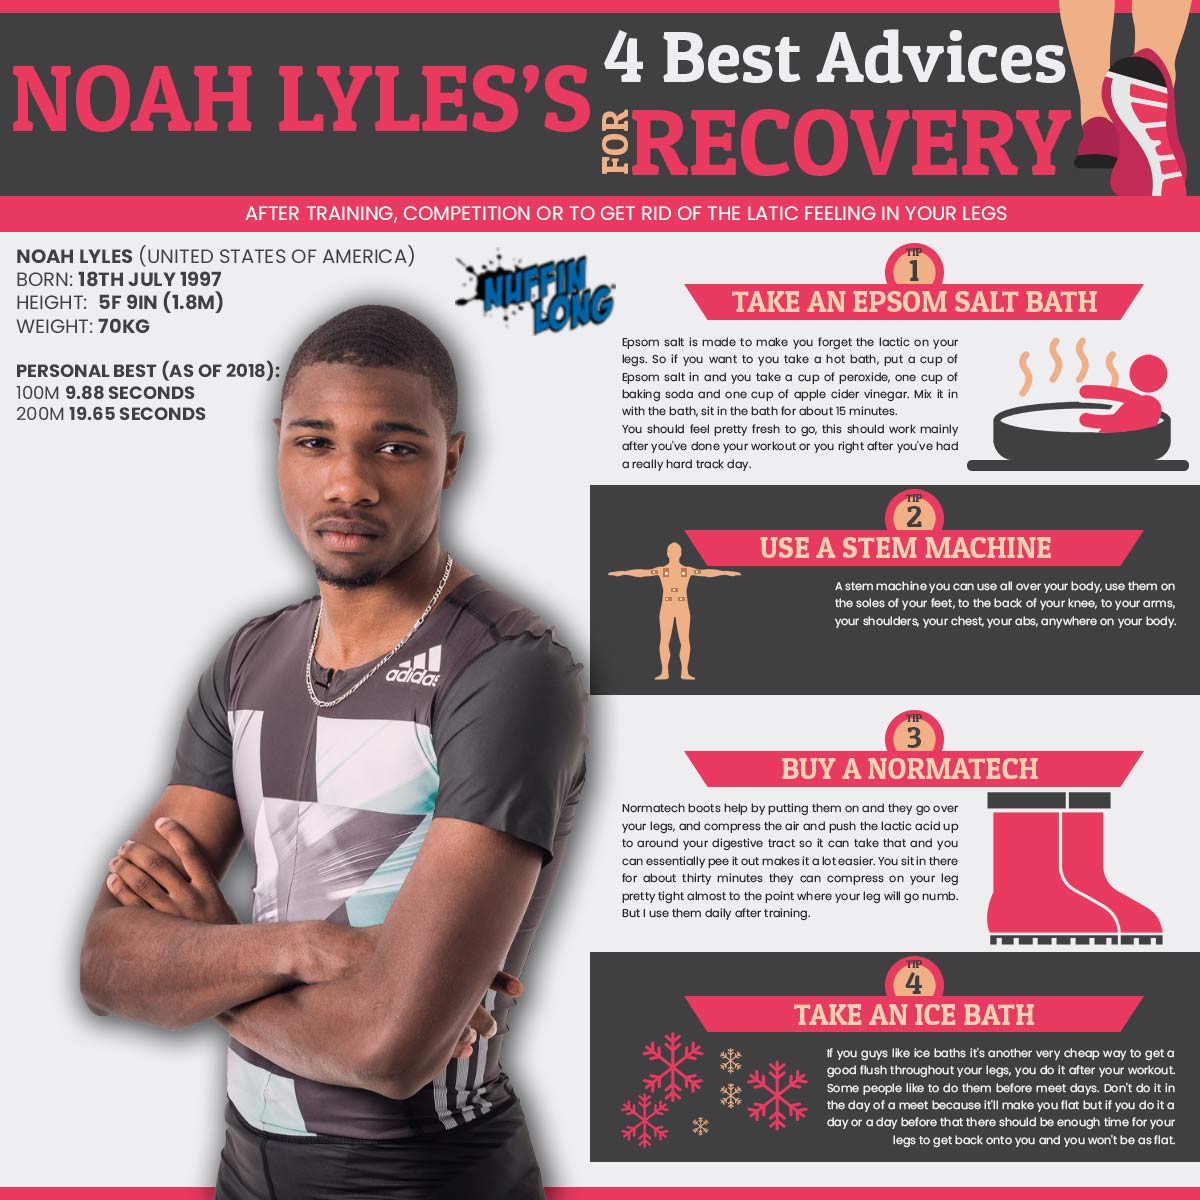 4 ways of recovery by Noah Lyles